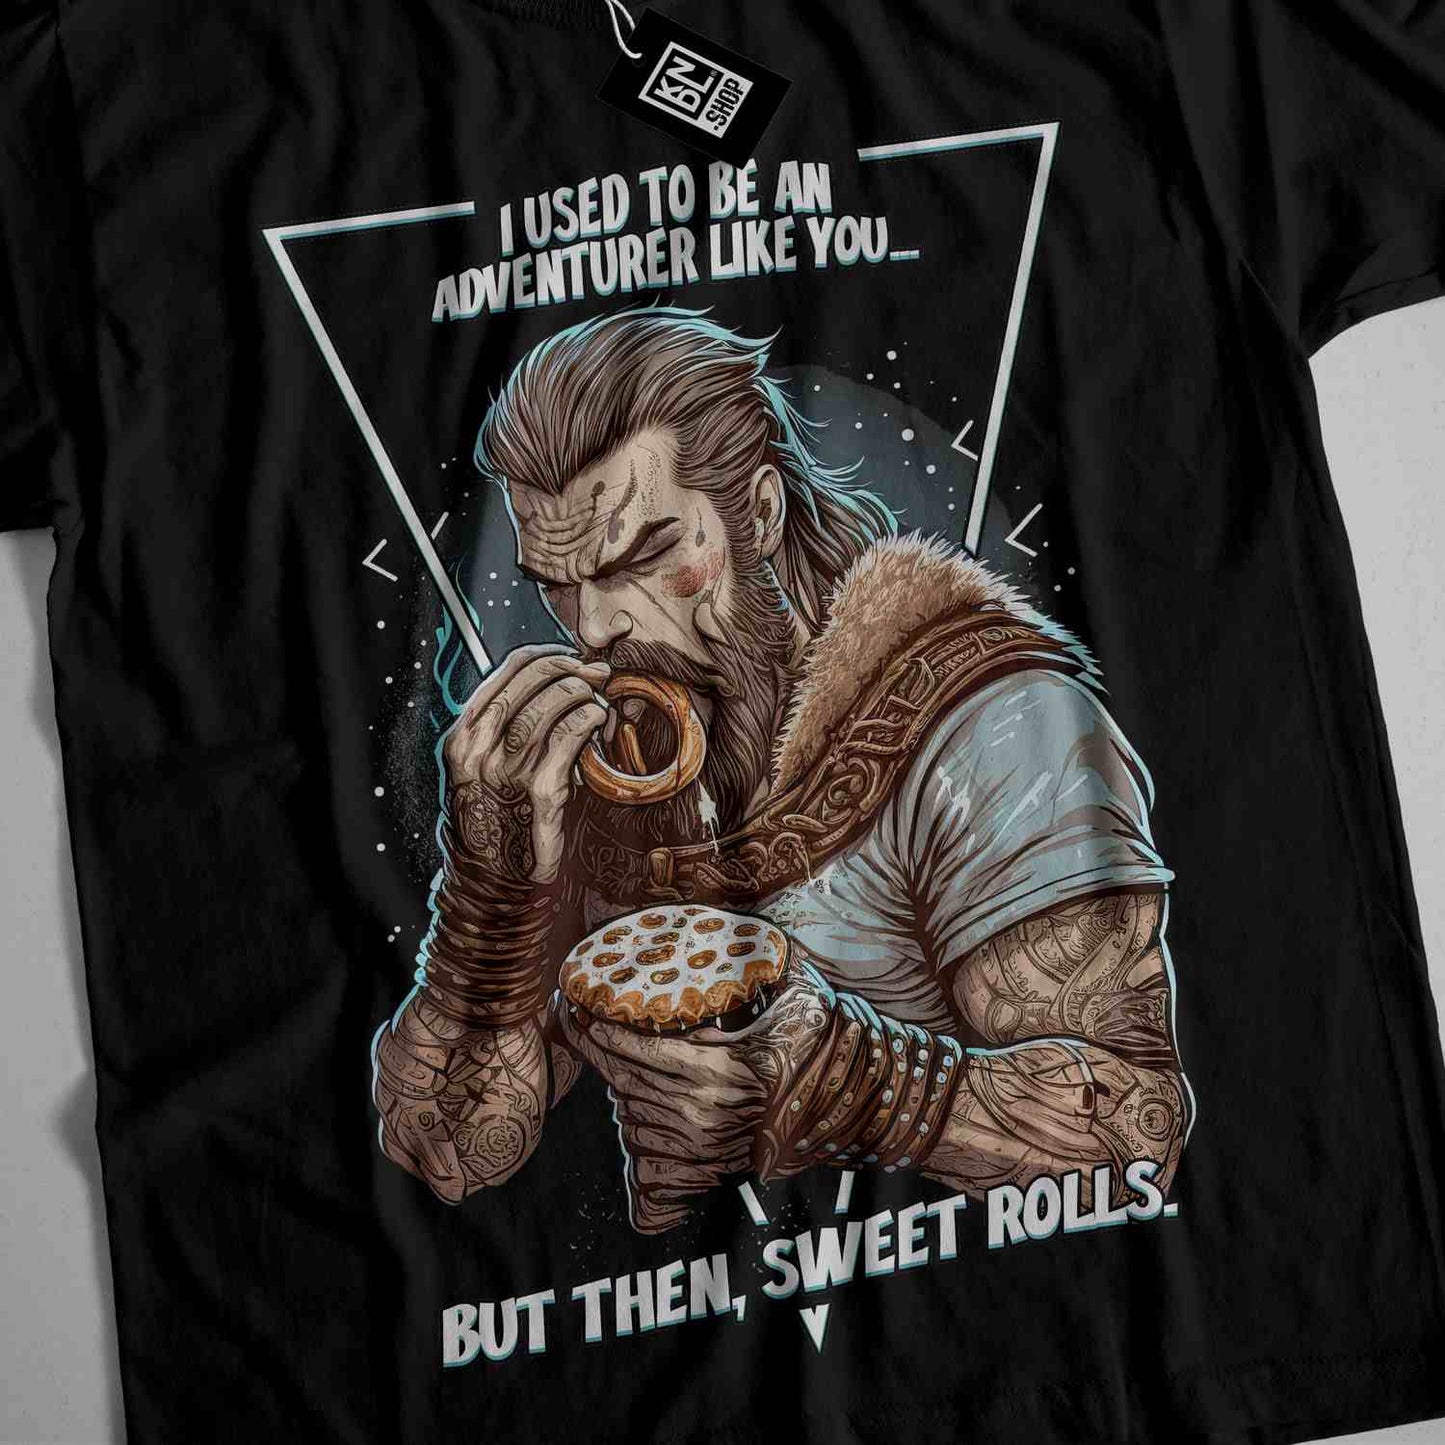 a t - shirt with an image of a man eating a donut